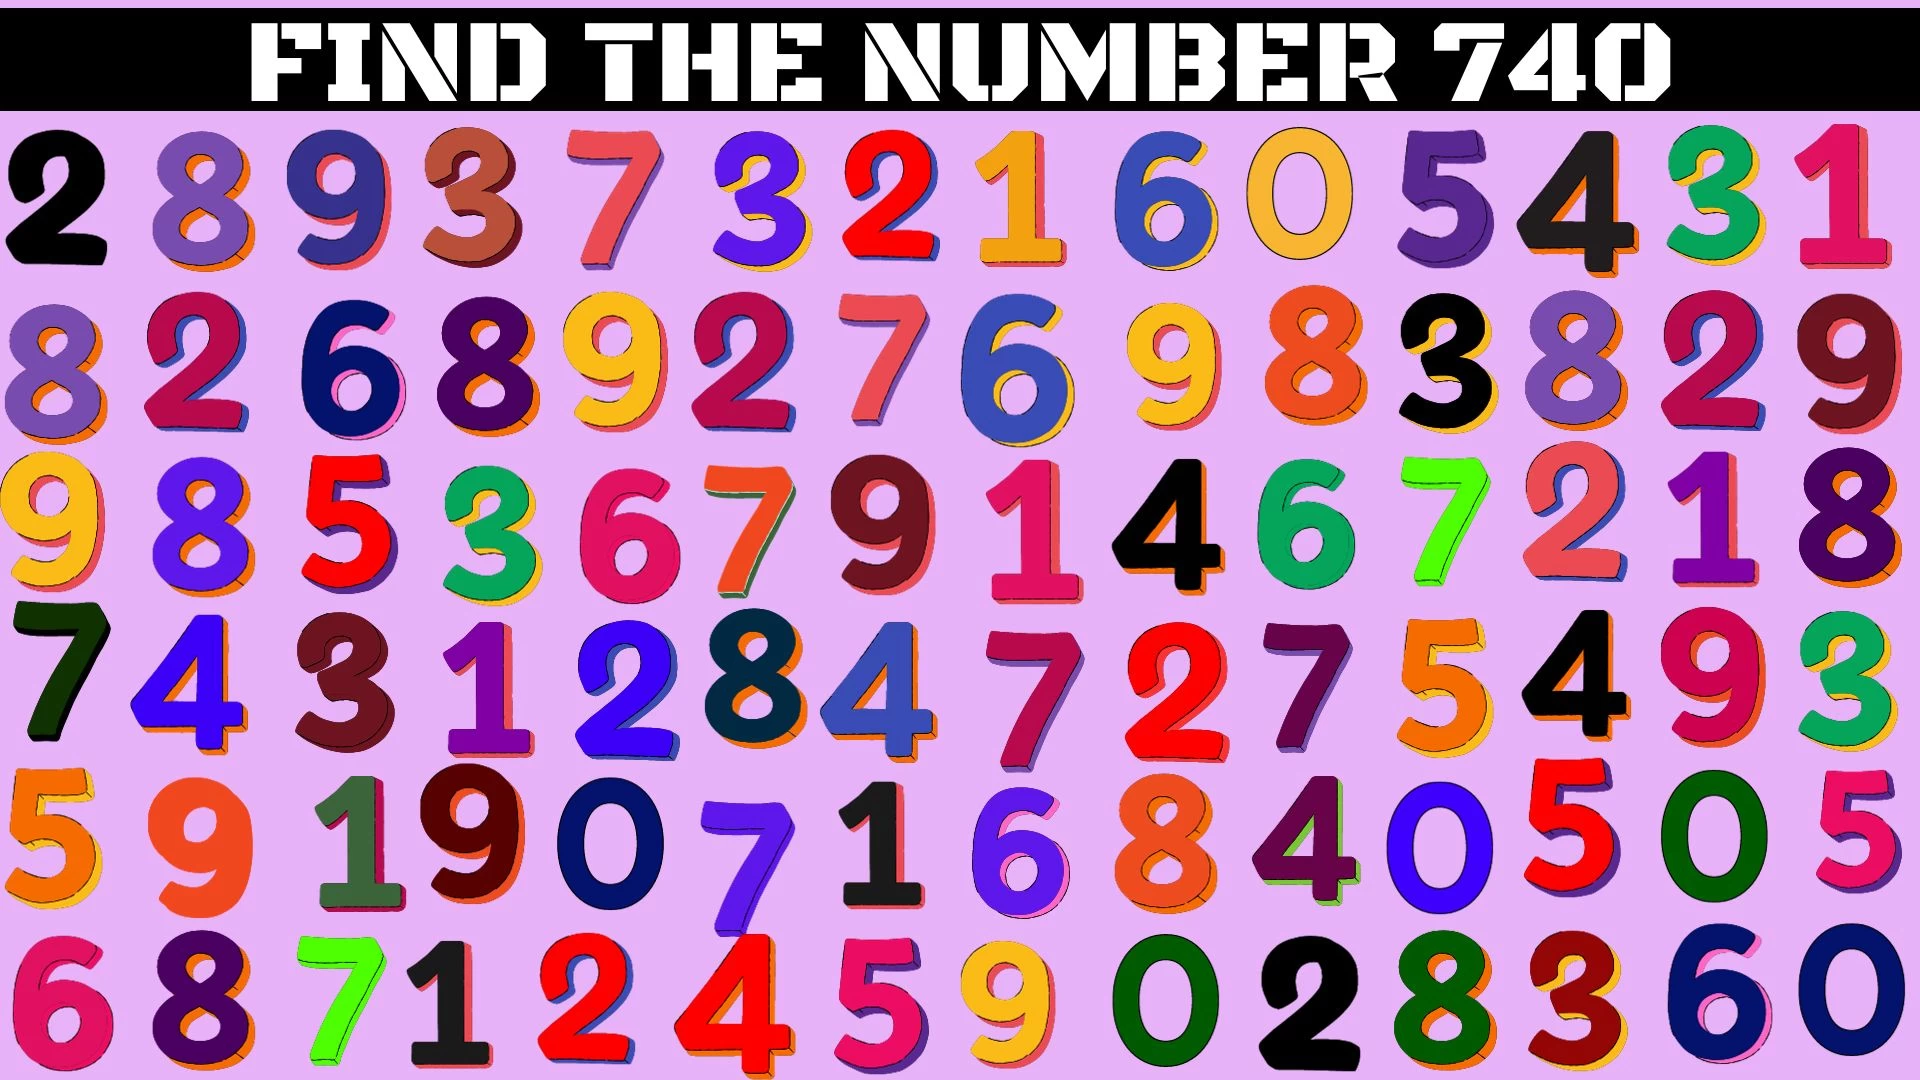 Optical Illusion Brain Challenge: If you have Eagle Eyes Find the Number 740 in 12 Secs